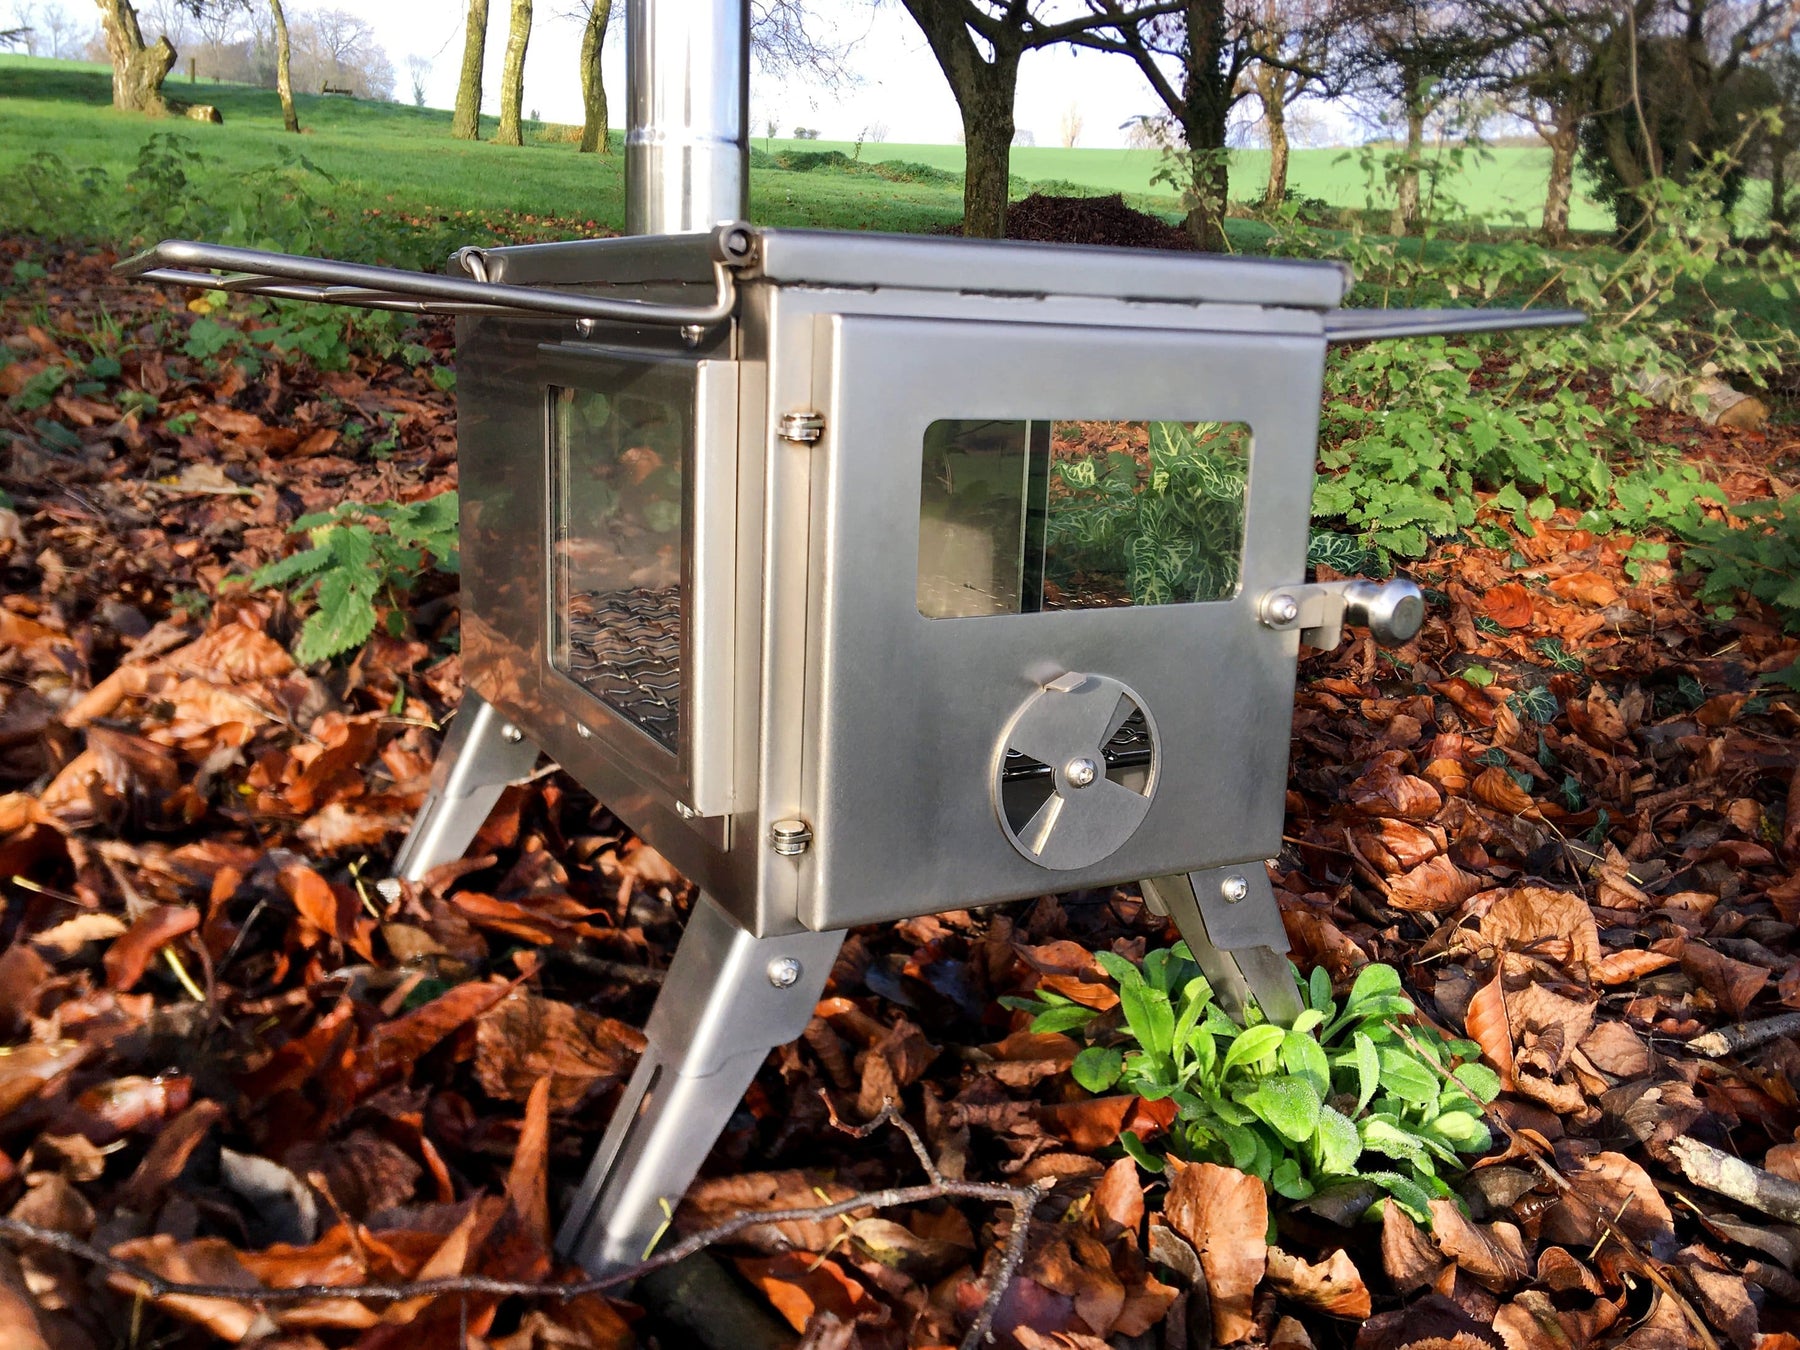 Outbacker® Firebox 'Flame' Clear View Stainless Steel Portable Tent Stove